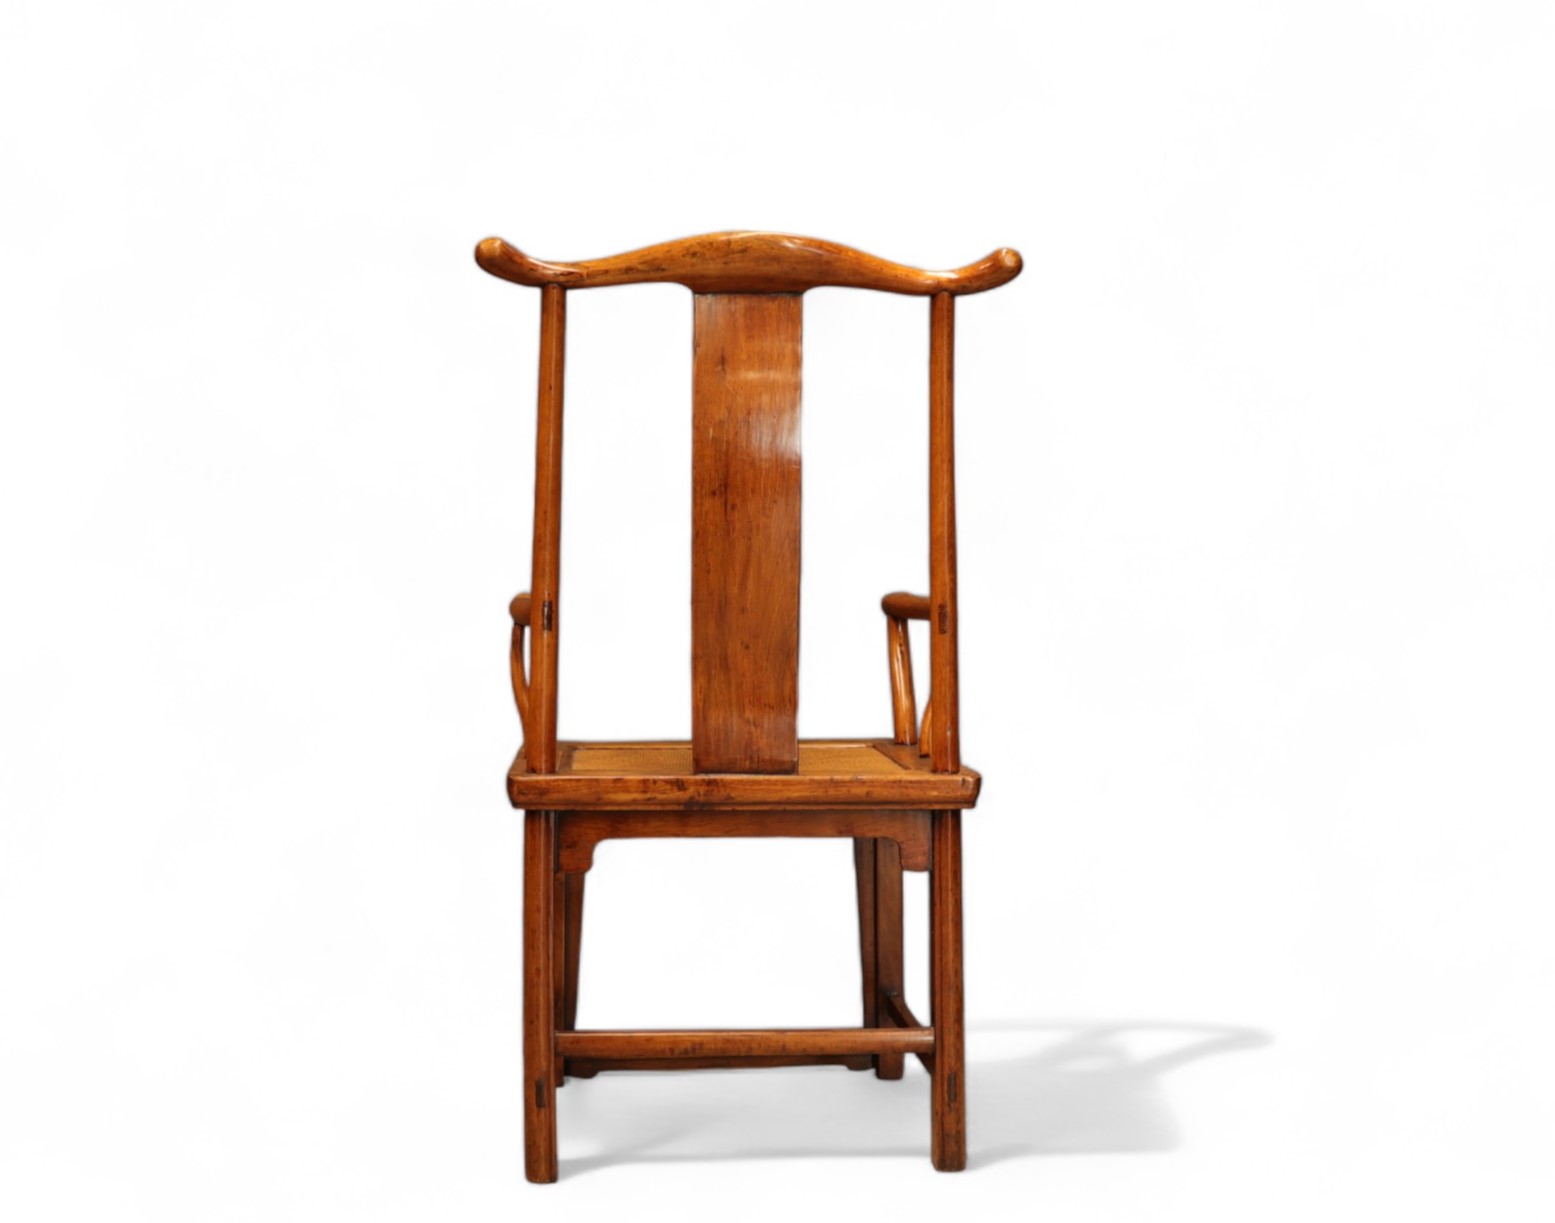 China - Exotic wood dignitary chair, caned seat, Qing dynasty. - Image 3 of 3